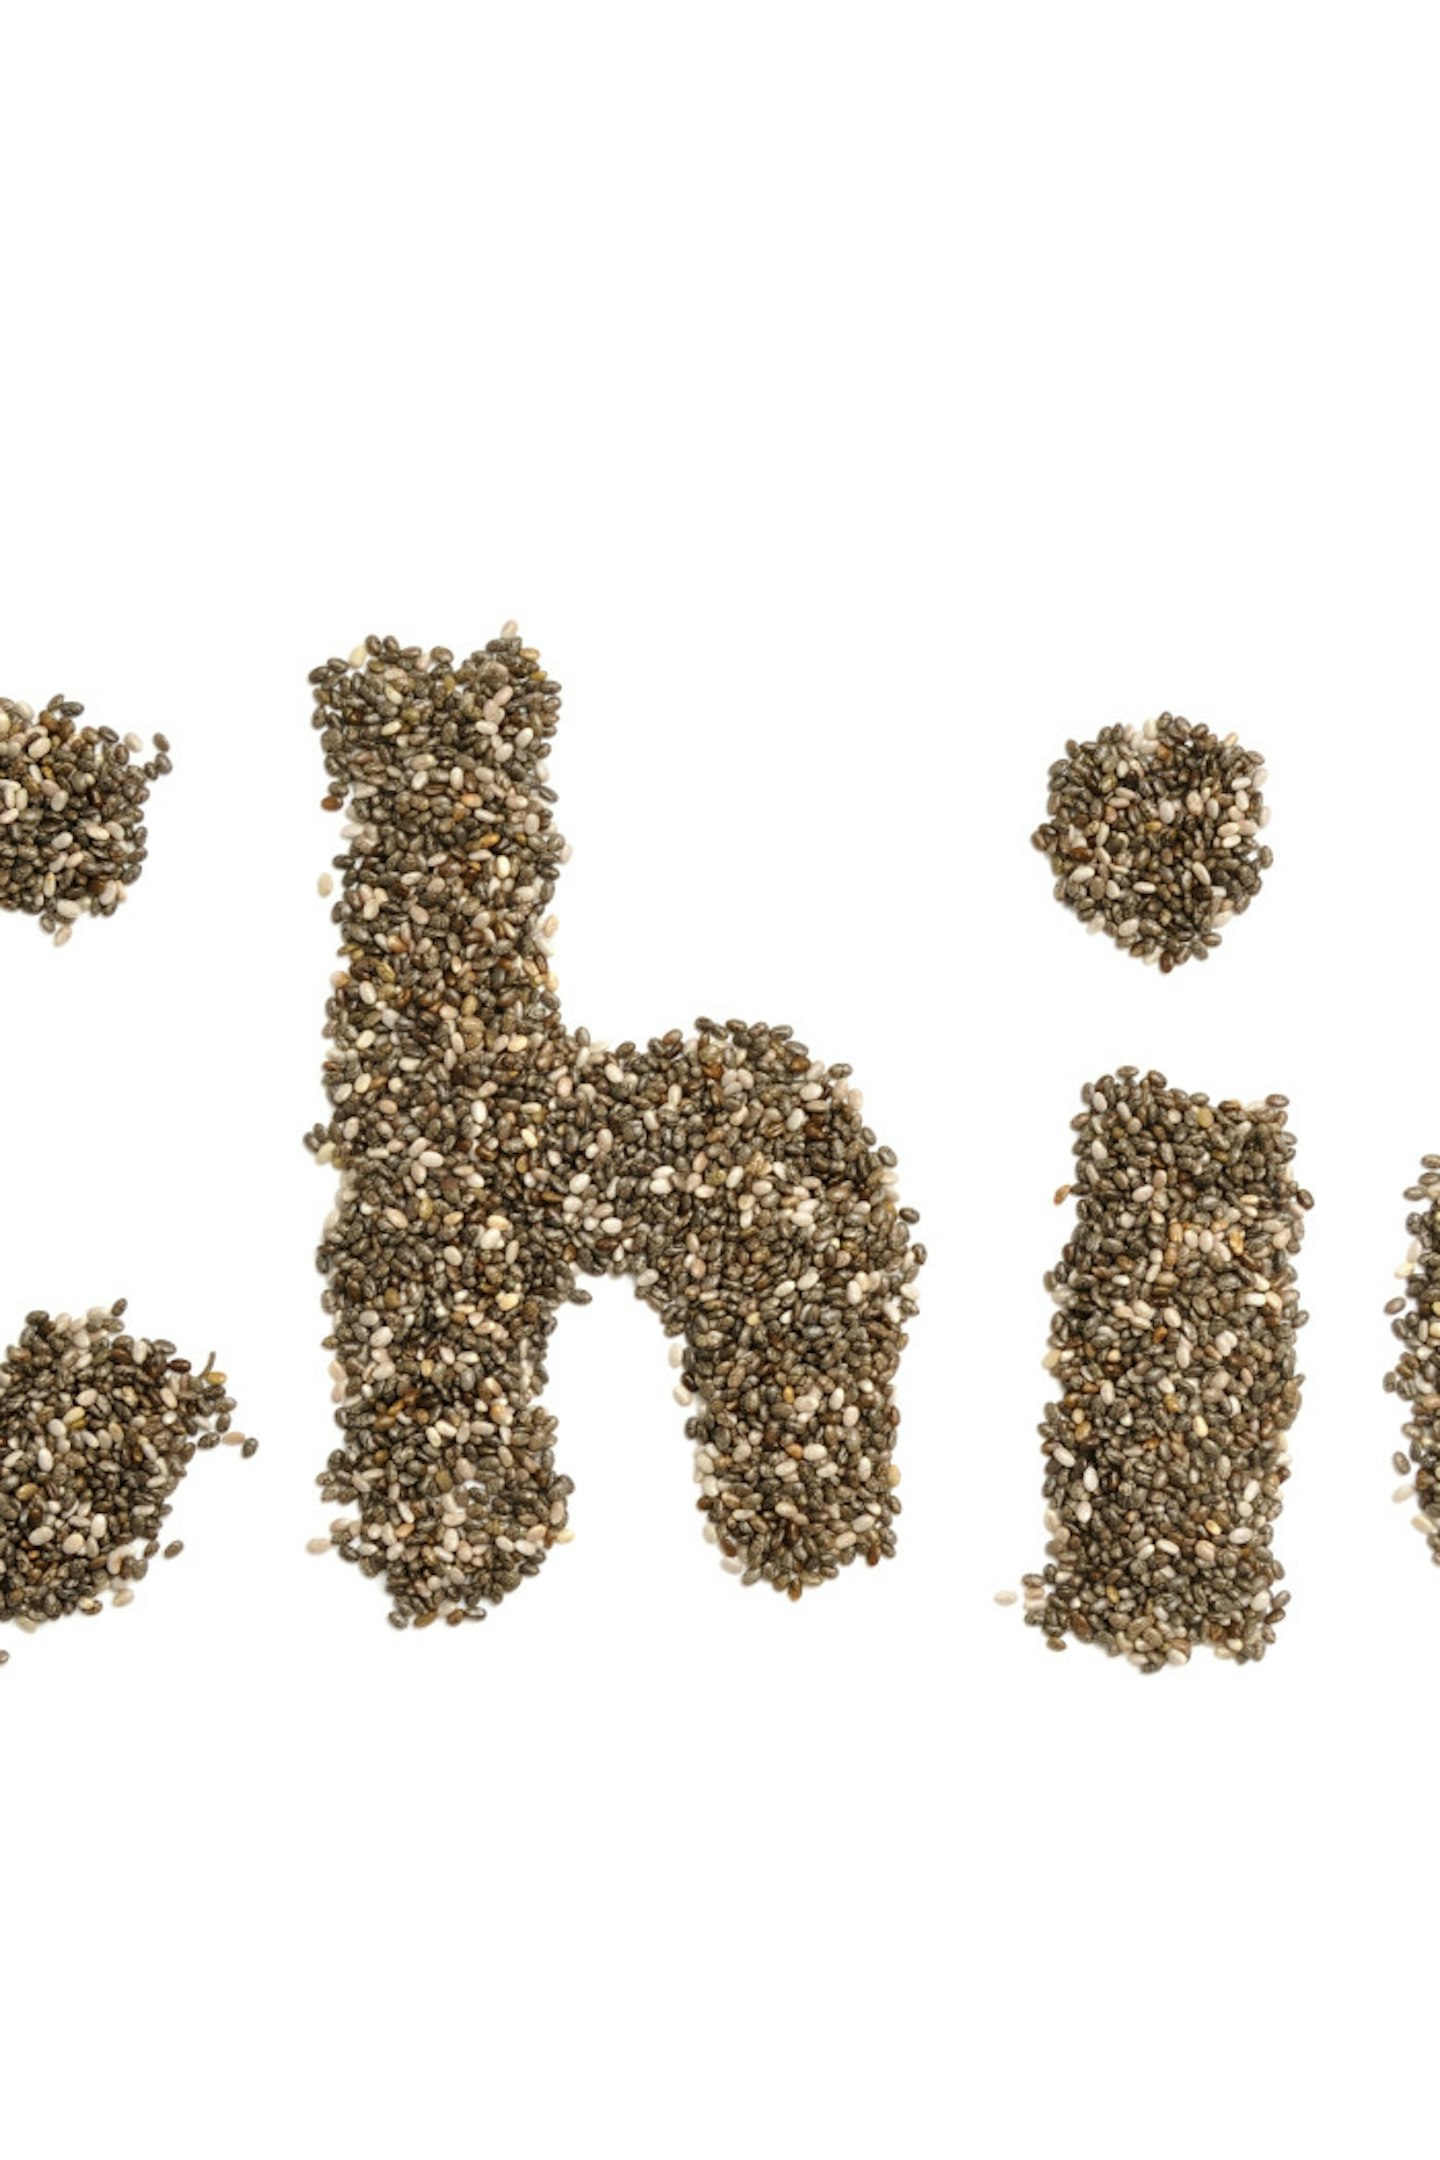 Swap chia seeds for...